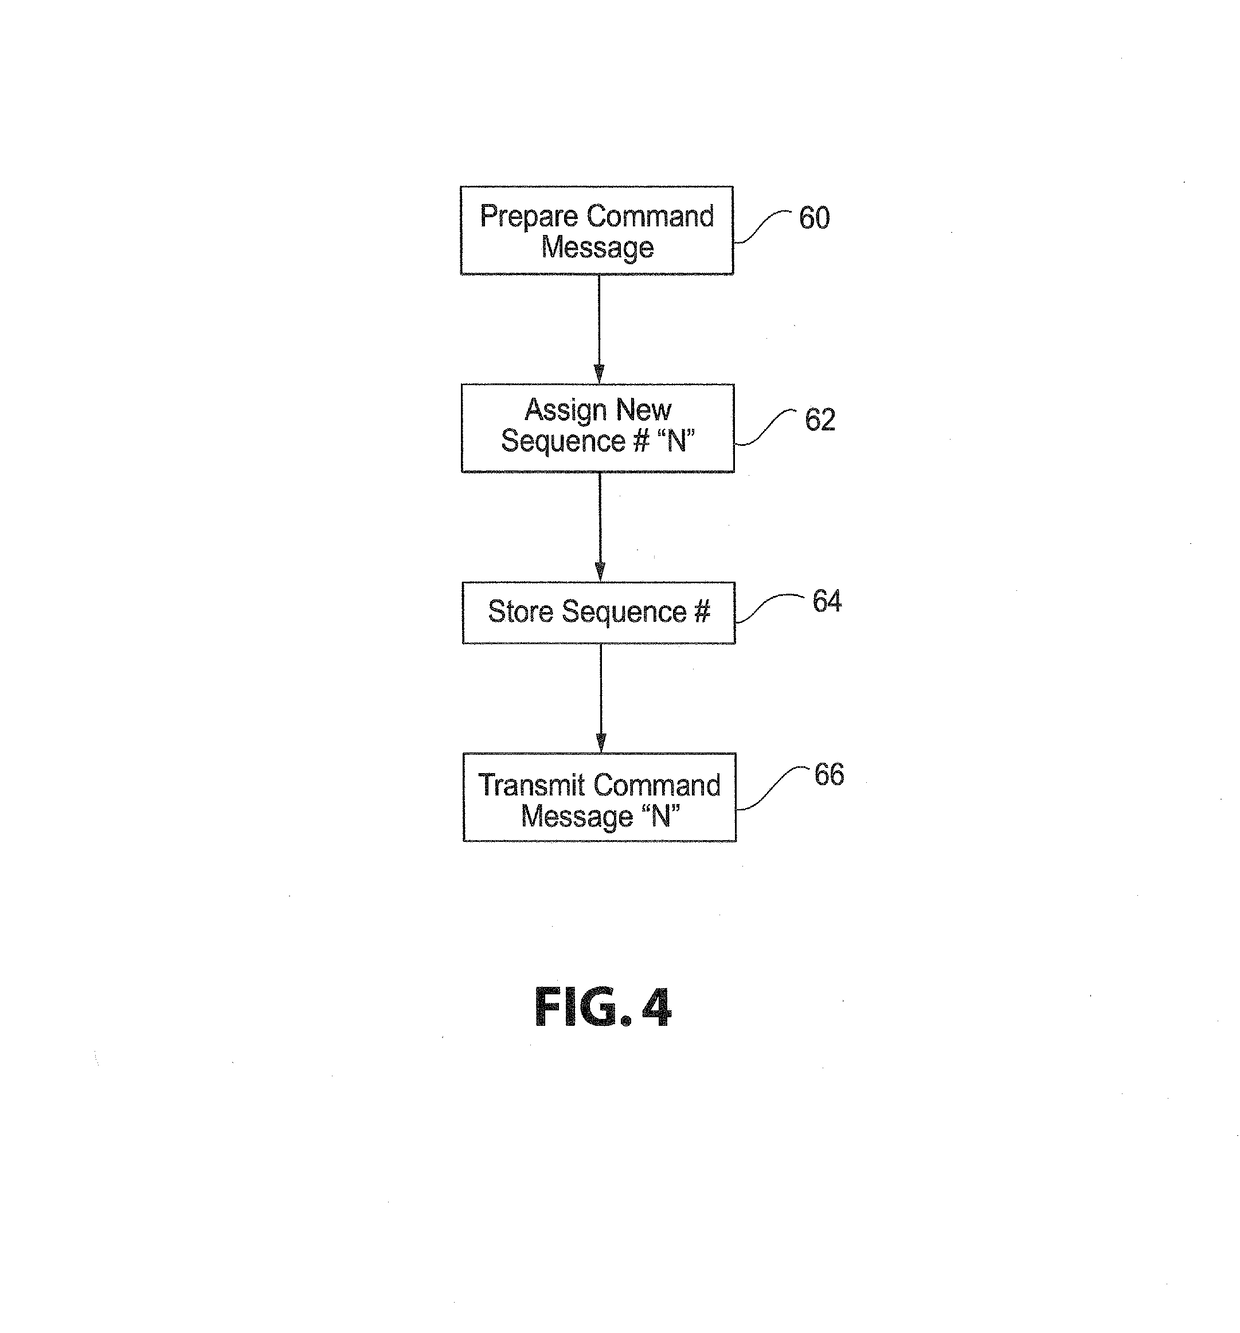 Distributed Power Remote Communication Status System And Method